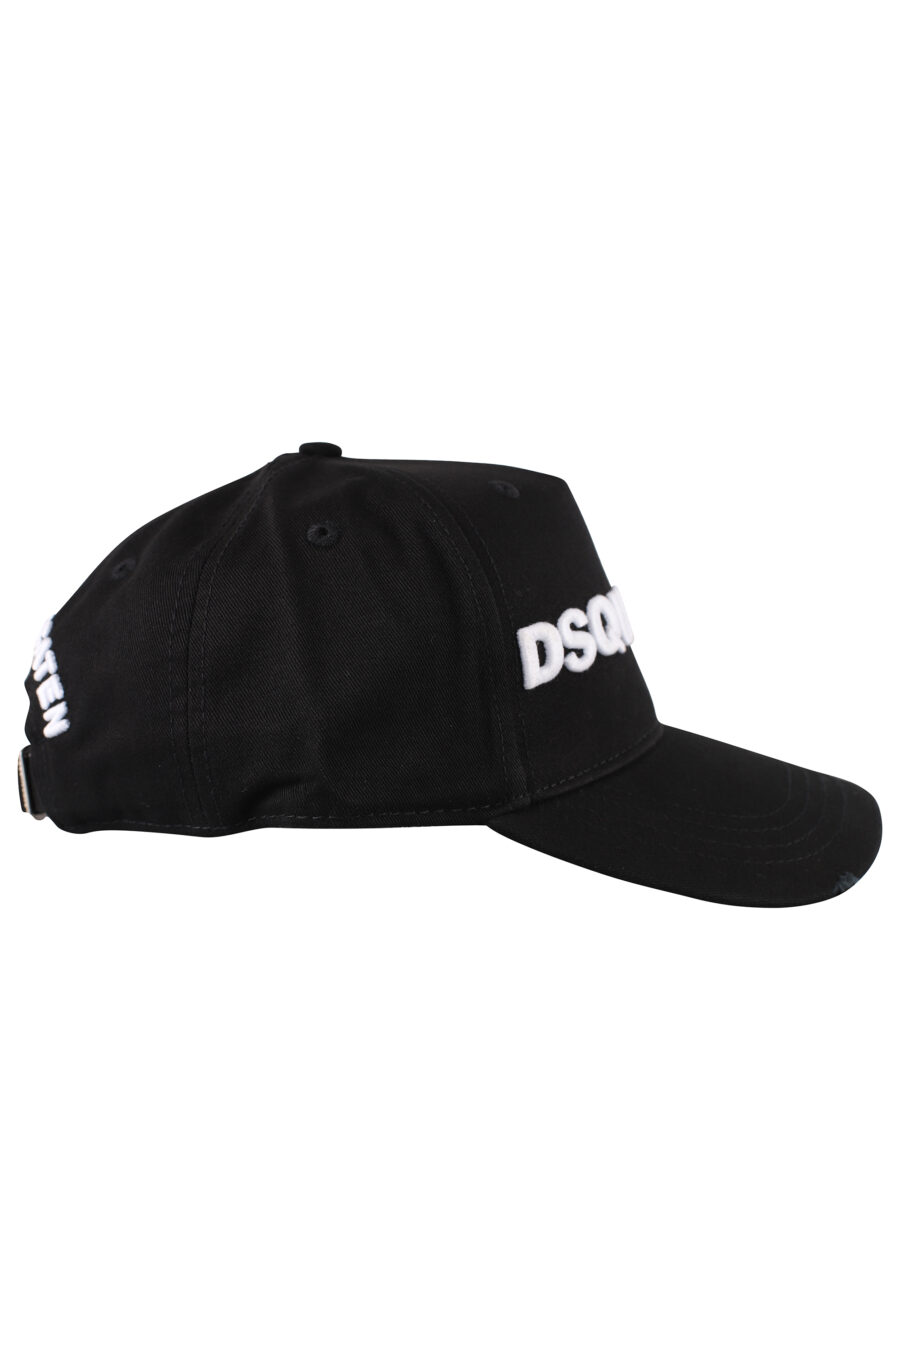 Black cap with white embroidered logo - IMG 1239